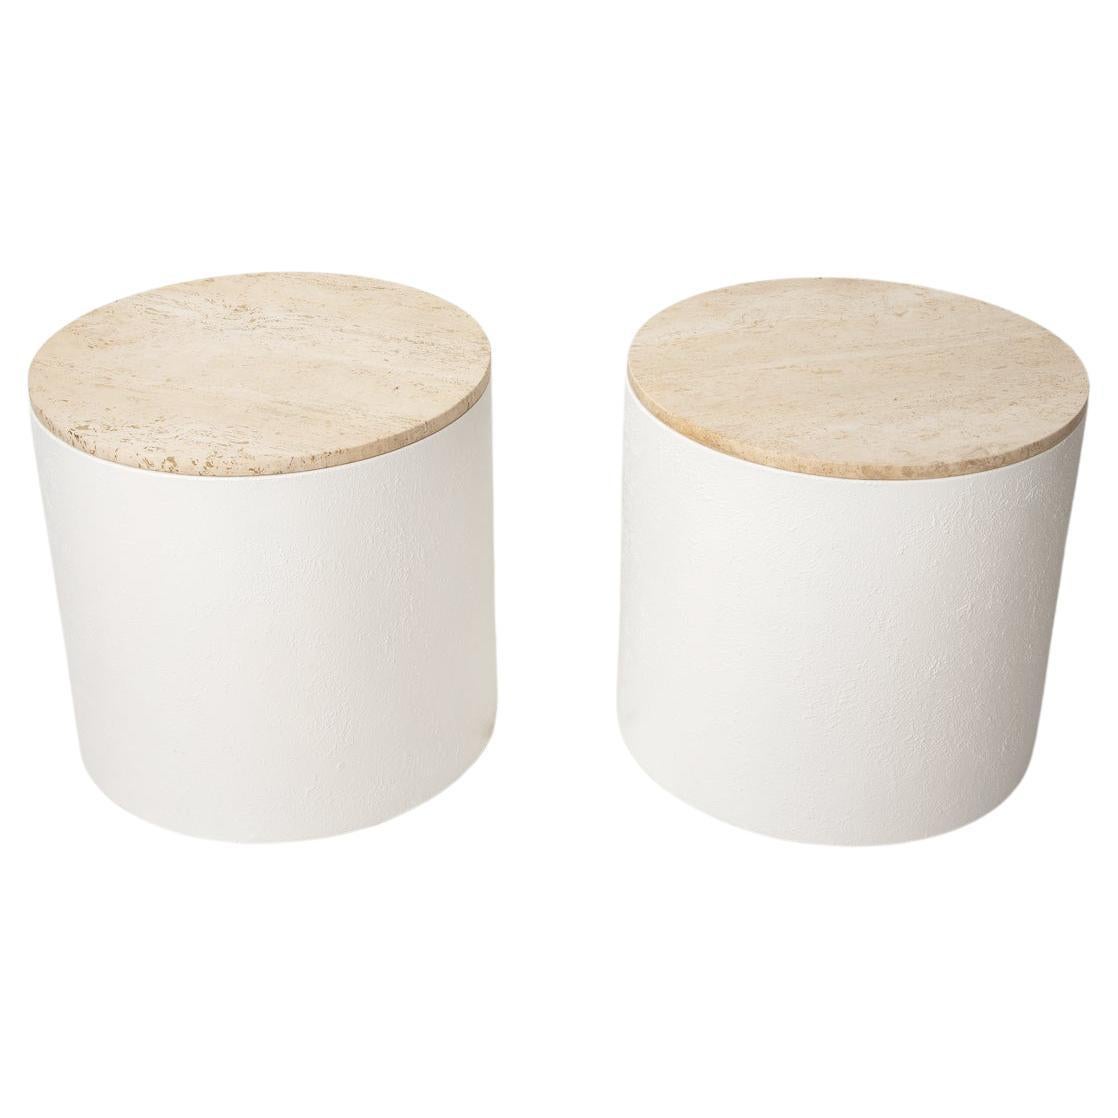 Pair of 1980's Travertine End Tables with White Textuerd Metal Drum Bases